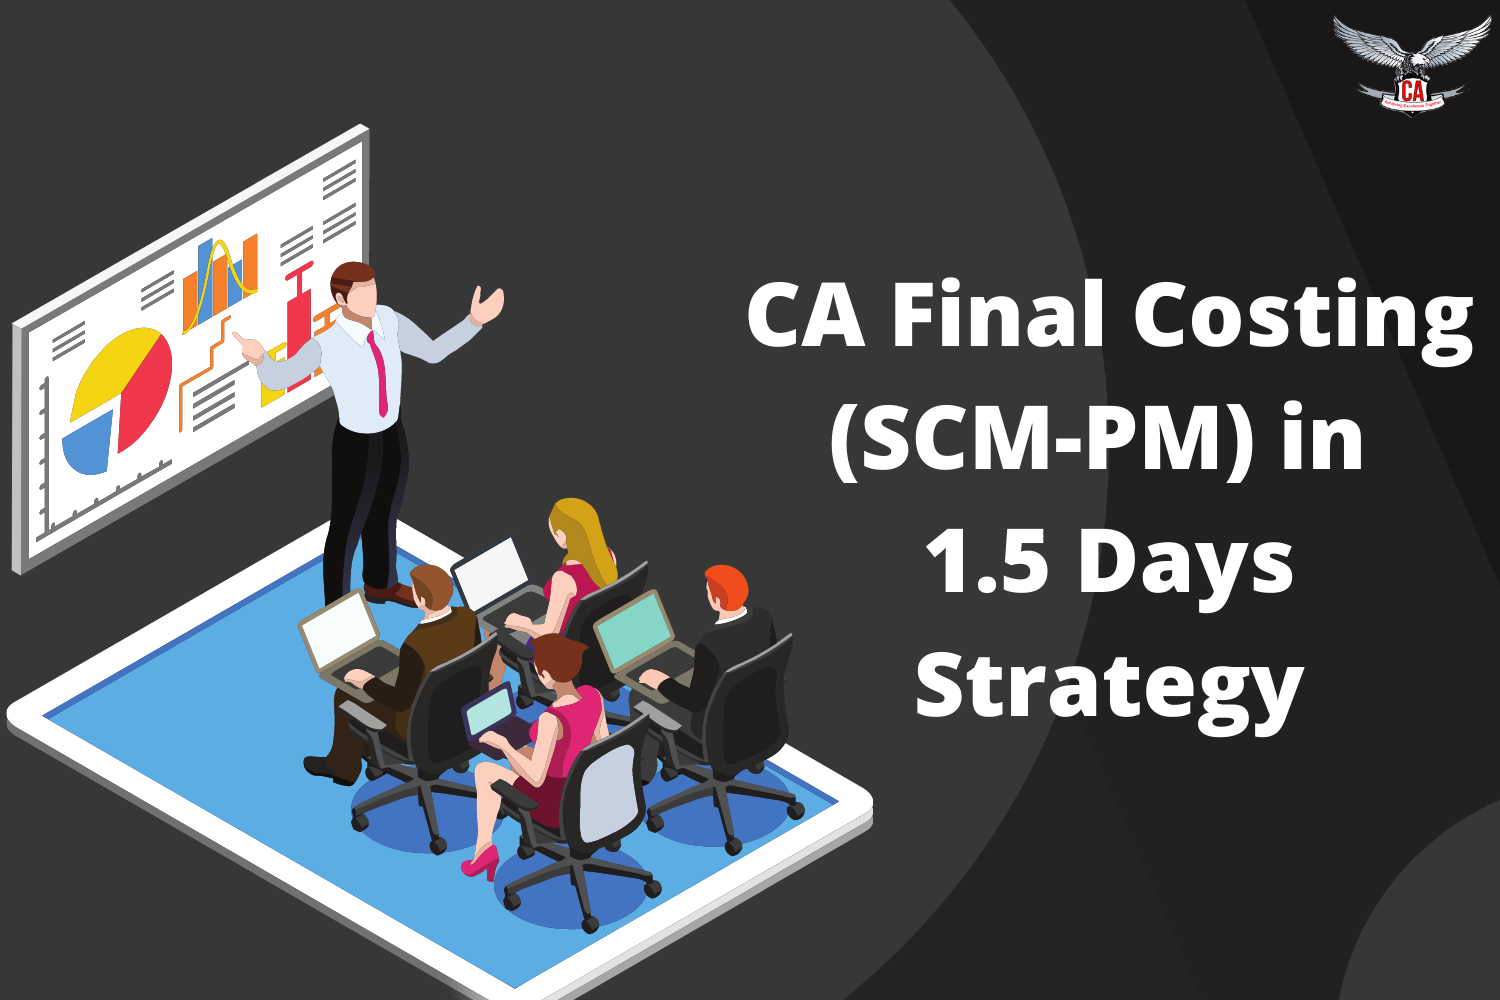 CA Final Costing (SCM-PE) in 1.5 days Strategy Latest